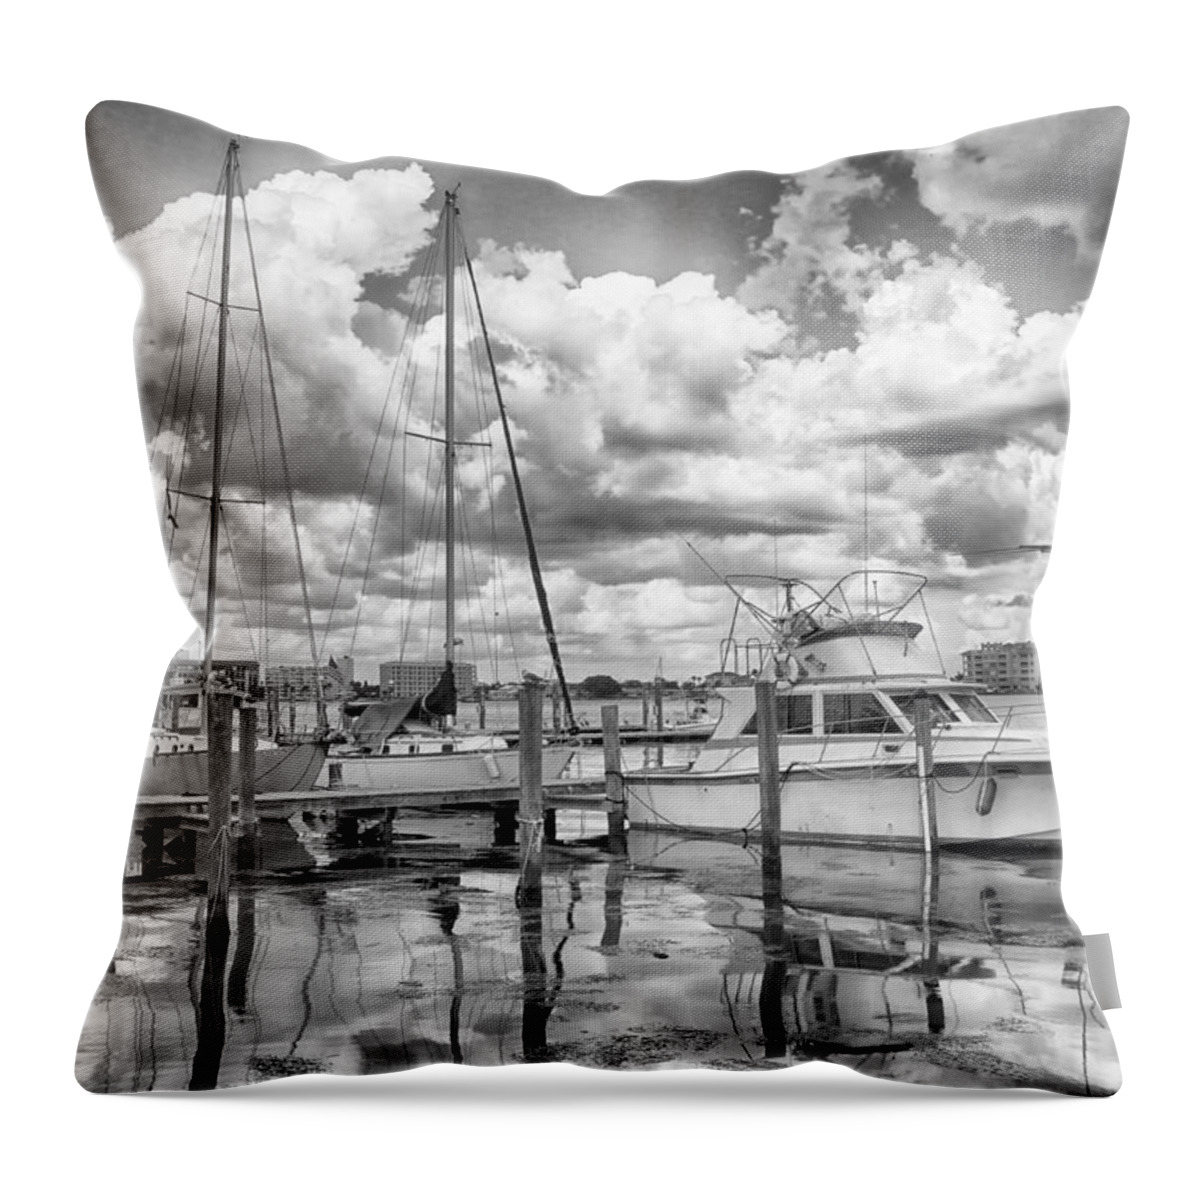 Seascape Photography Throw Pillow featuring the photograph The Boat by Howard Salmon